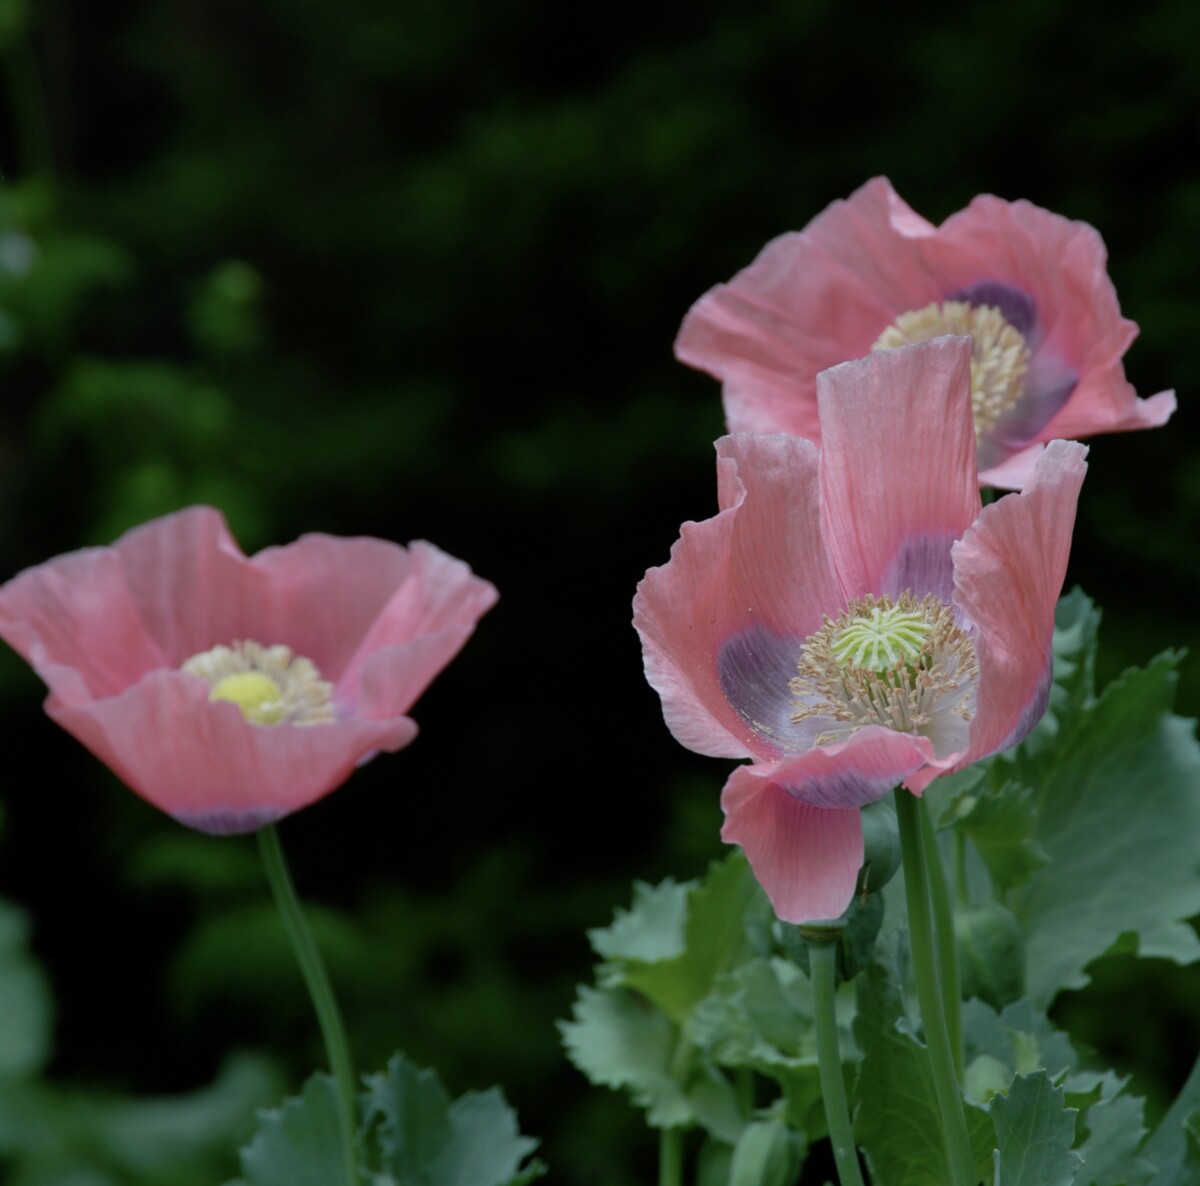 3 blooms of pale pink opium poppies against a dark background